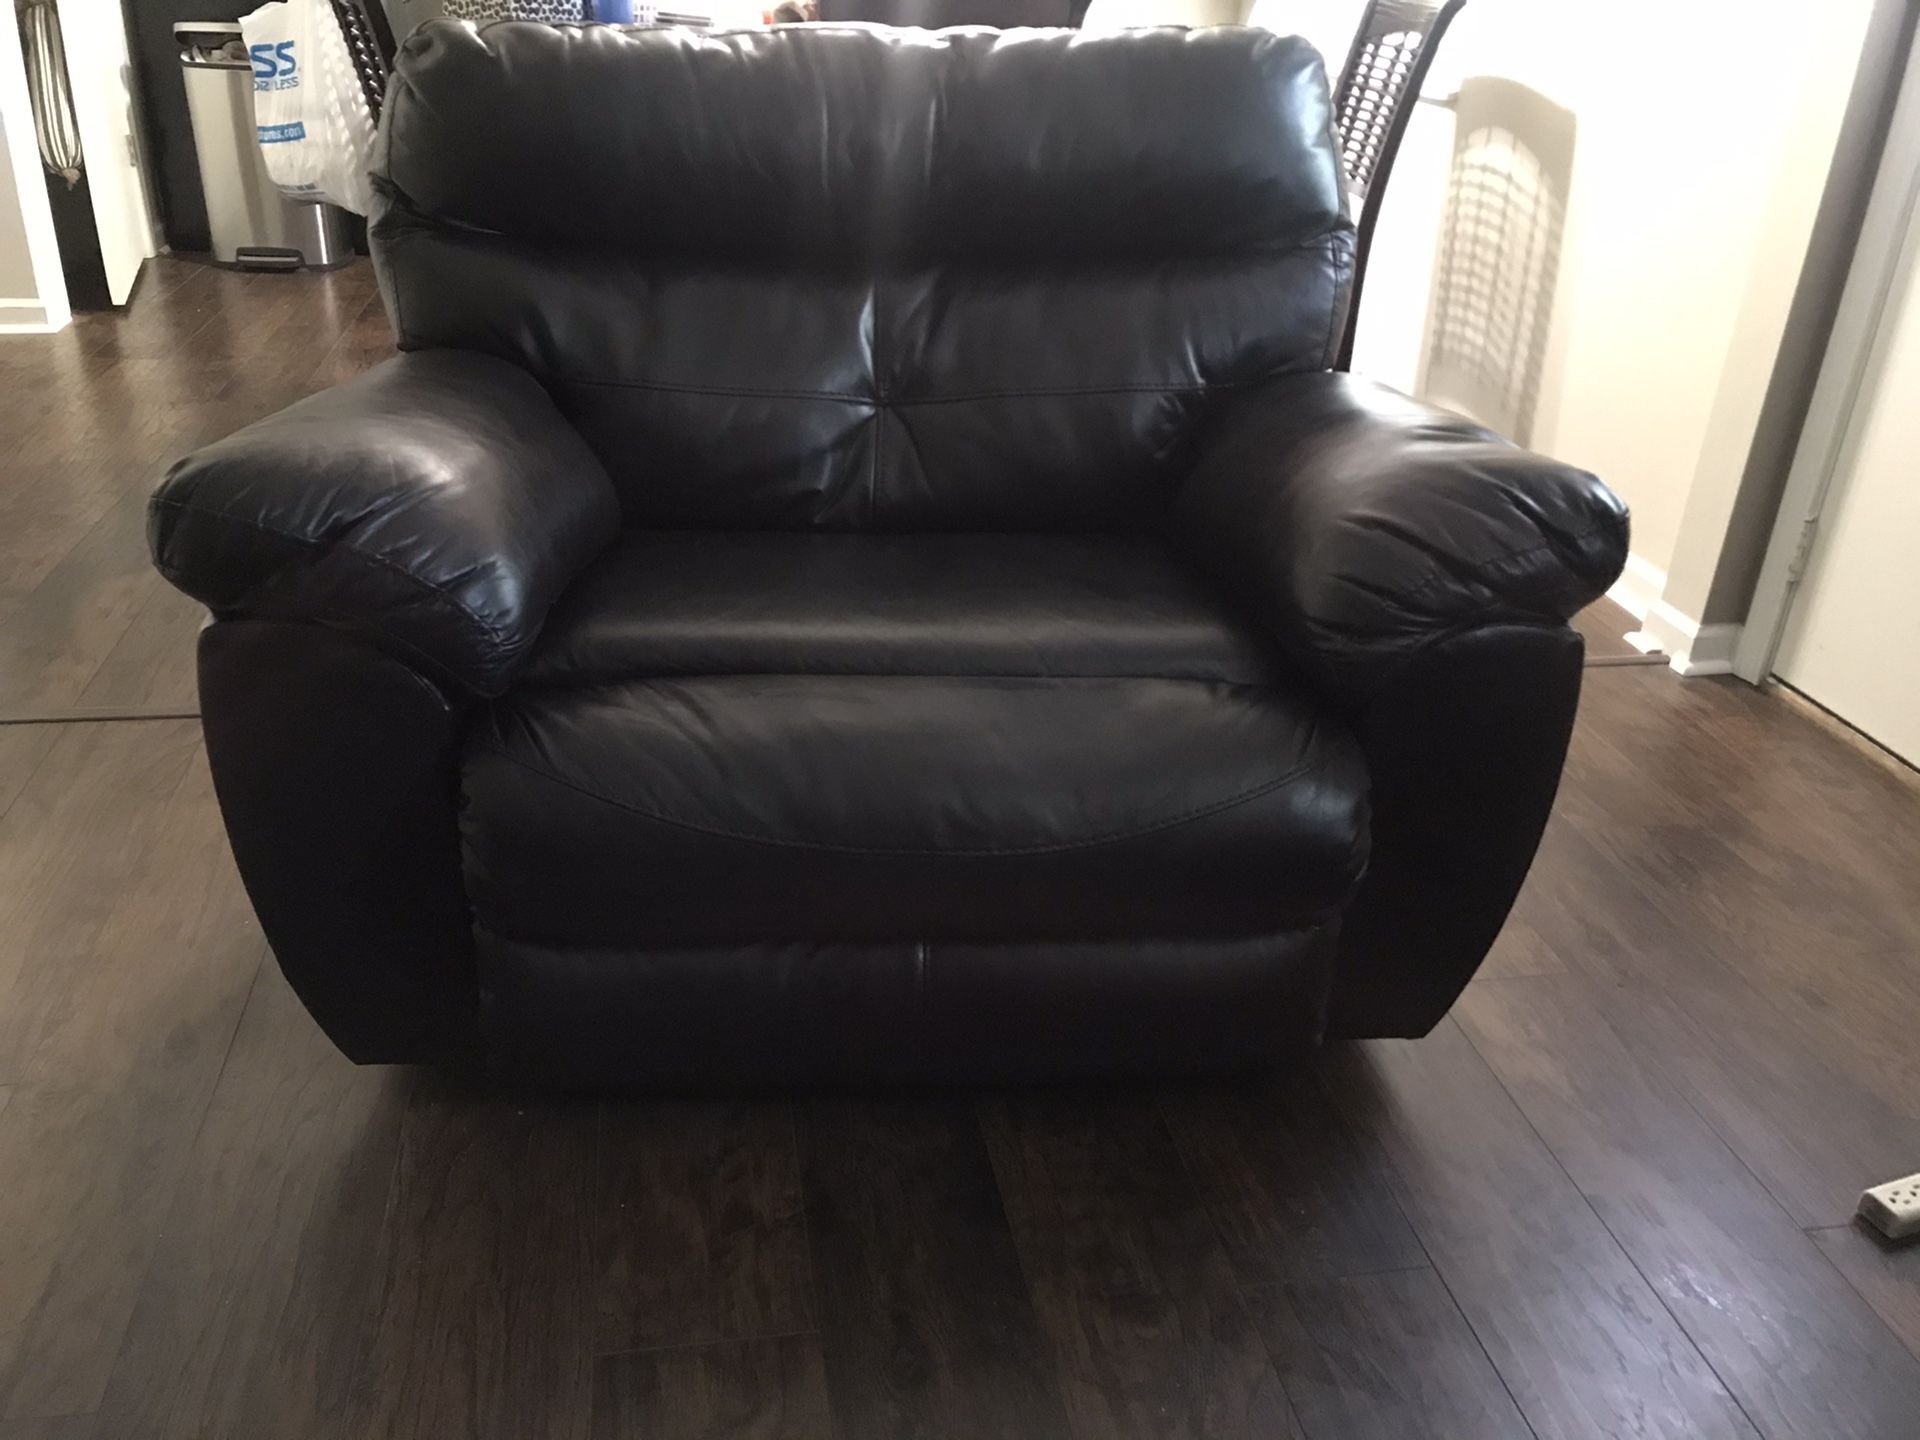 3 pieces recliners( love seat with cup holder, oversized chair and couch) ALL three for sale $500.00 or Best Offer